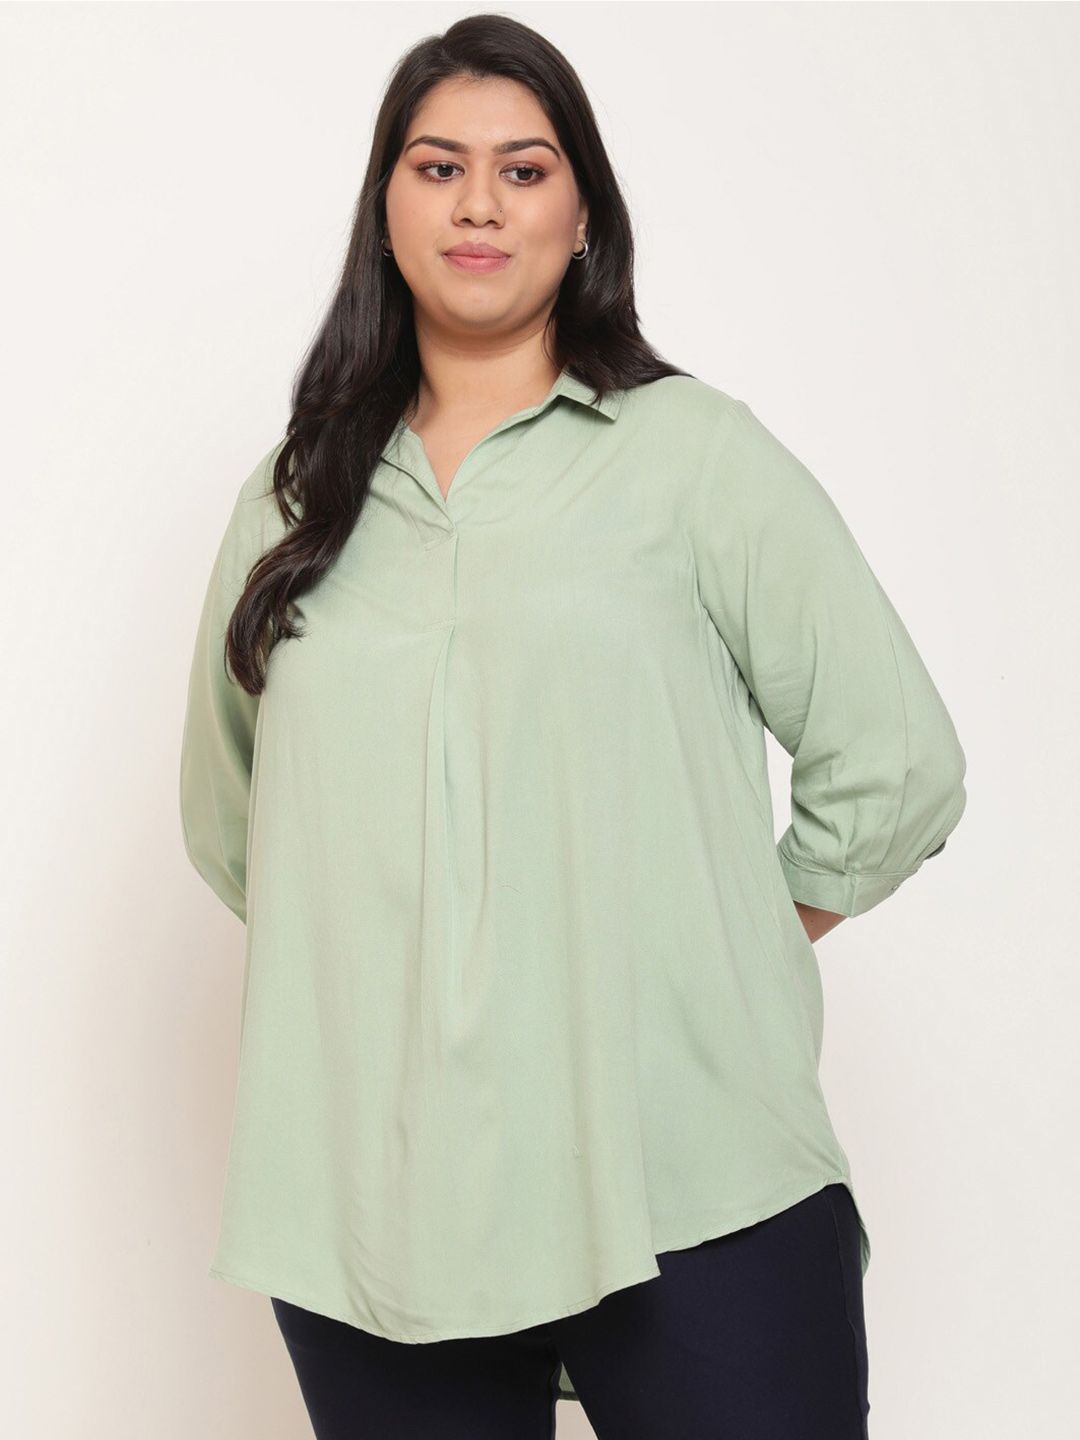 Amydus Plus Size Shirt Style Top Price in India